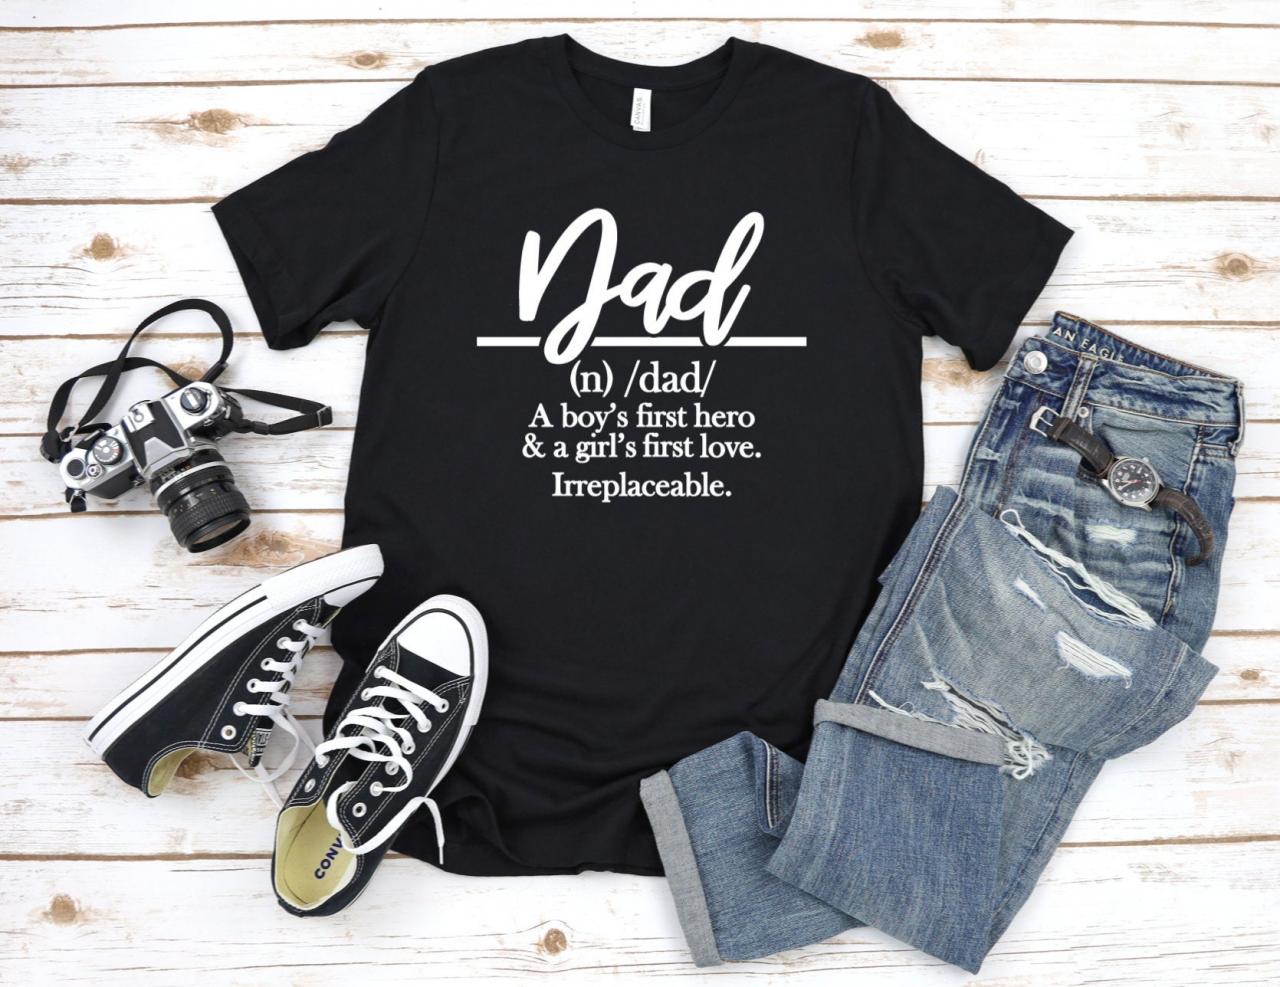 Dad Definition Shirt, Father's Day Gift, Husband Gift From Wife, Daddy Shirt, Grandpa Gift, Funny Father Tee, Fathers Day Shirt